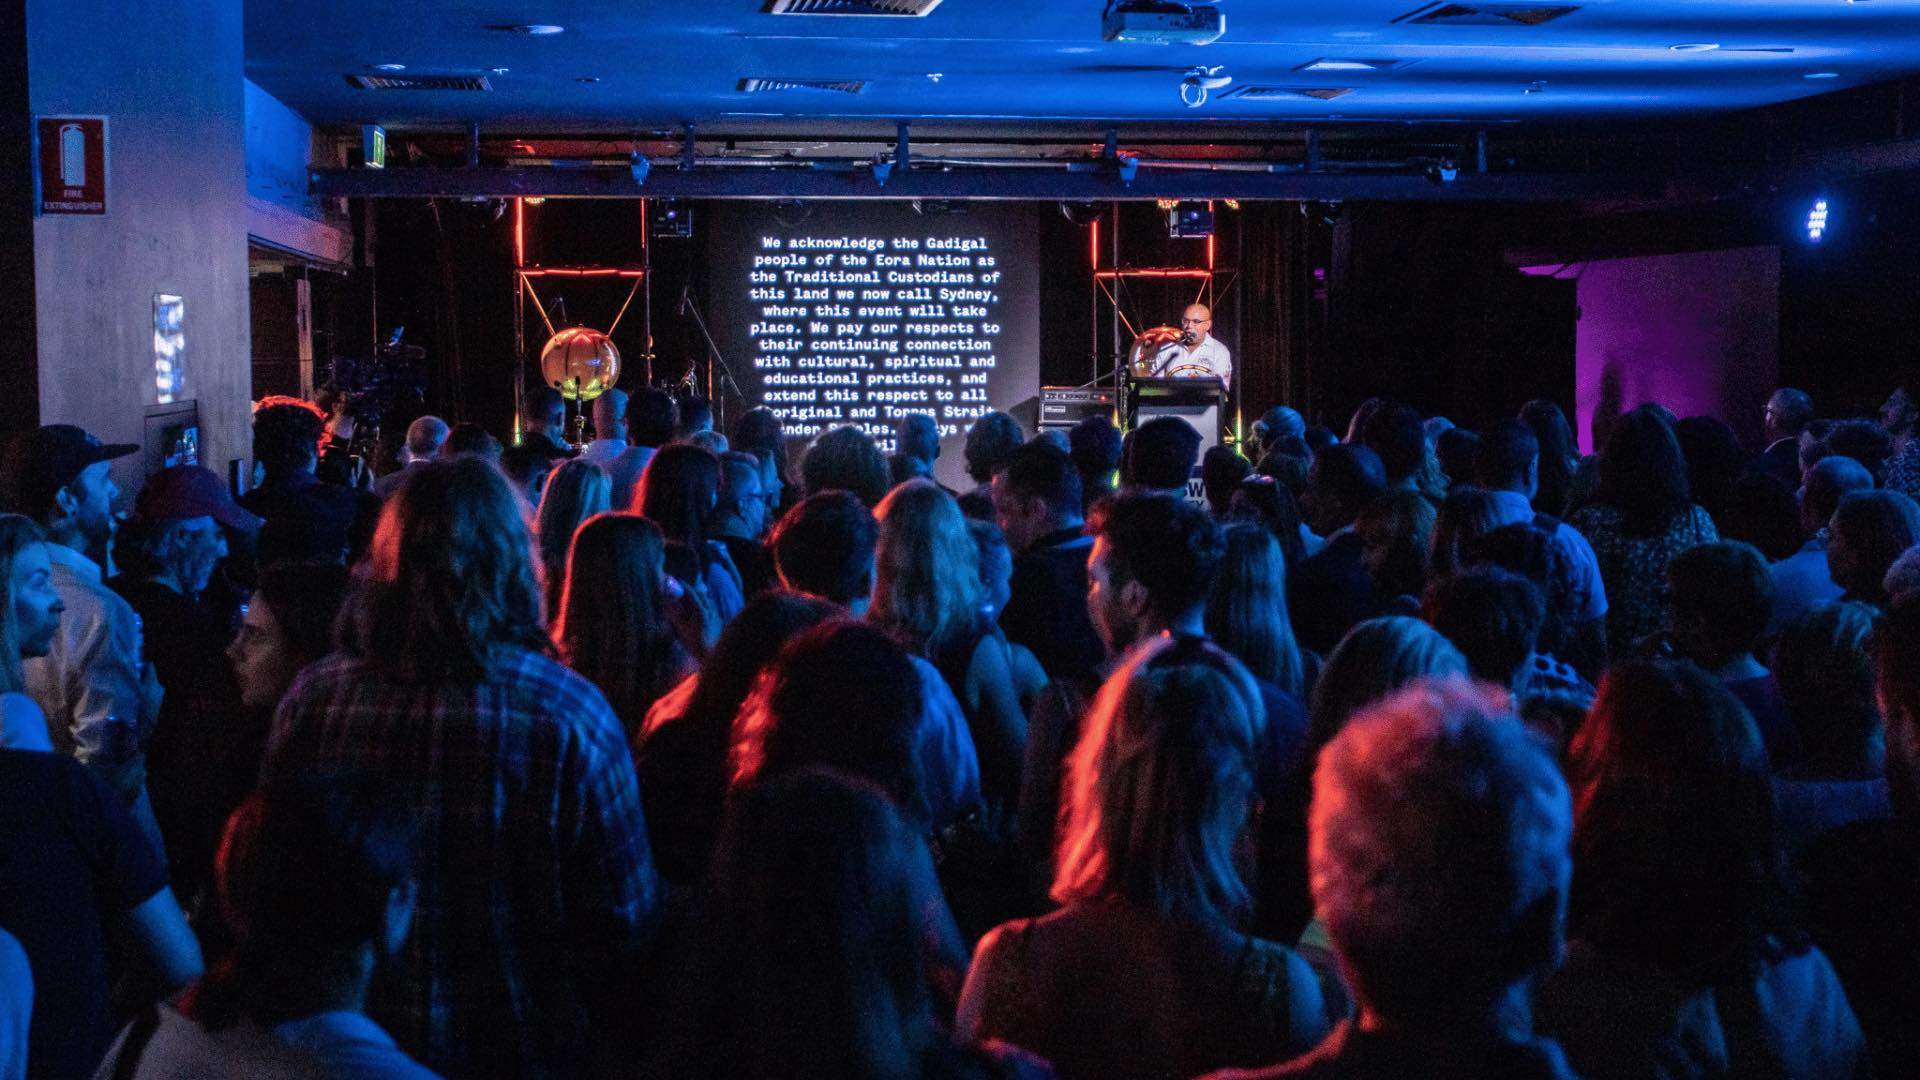 A man presenting a screen with text in front of a crowd.